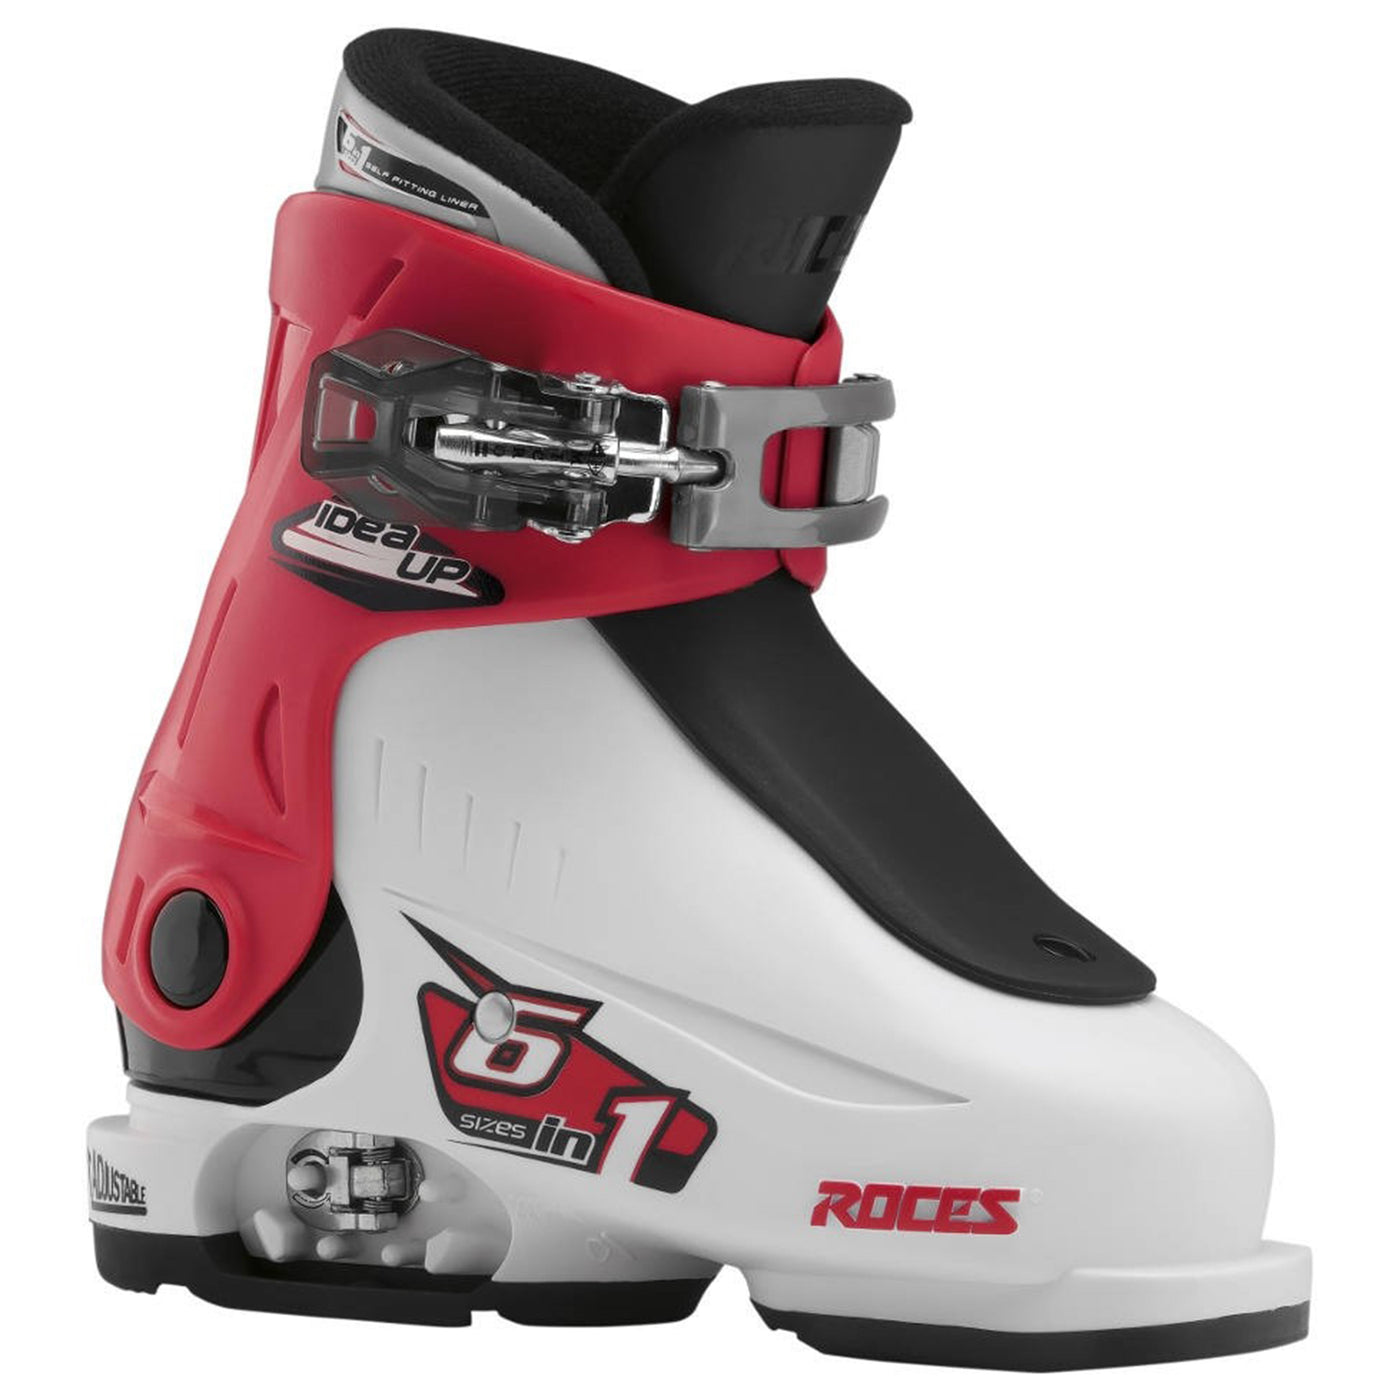 Roces IDEA Up Adjustable Youth Ski Boots | Size 16.0-18.5 (Open Box Return) SKI BOOTS Roces White/Red/Black  